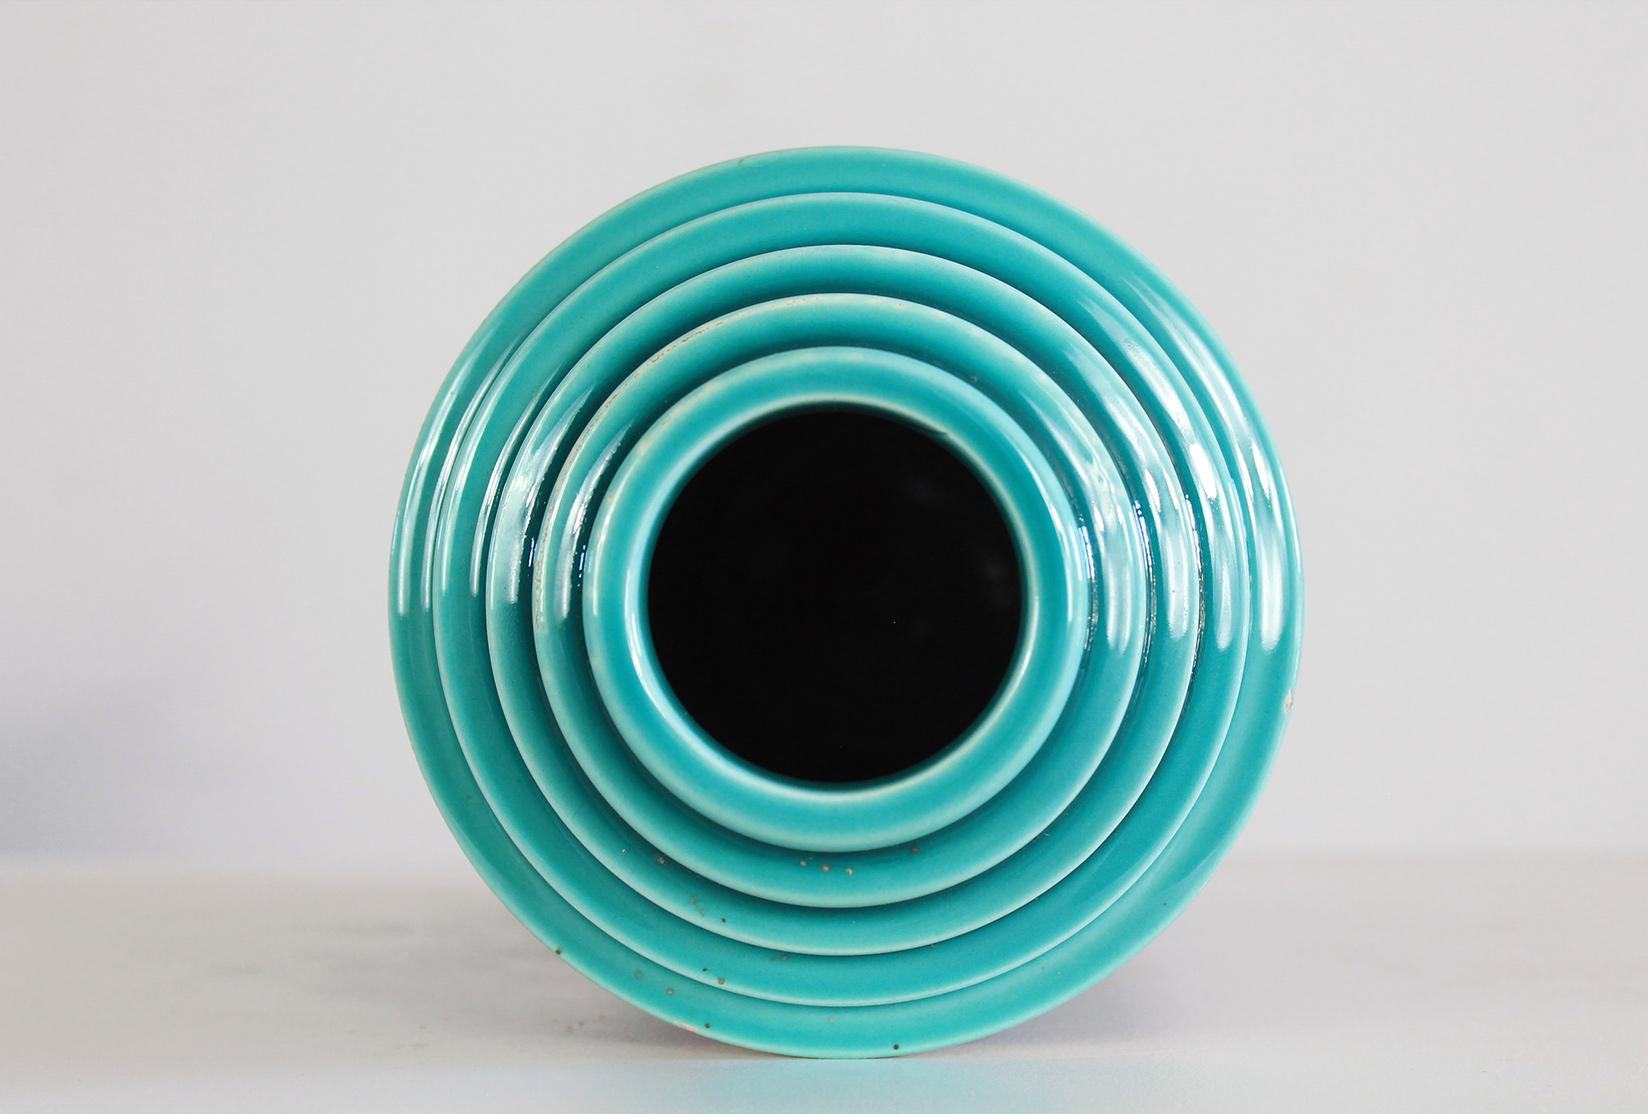 Ettore Sottsass Vase from Stepped Series in Enameled Ceramic by Bitossi 1990s For Sale 1